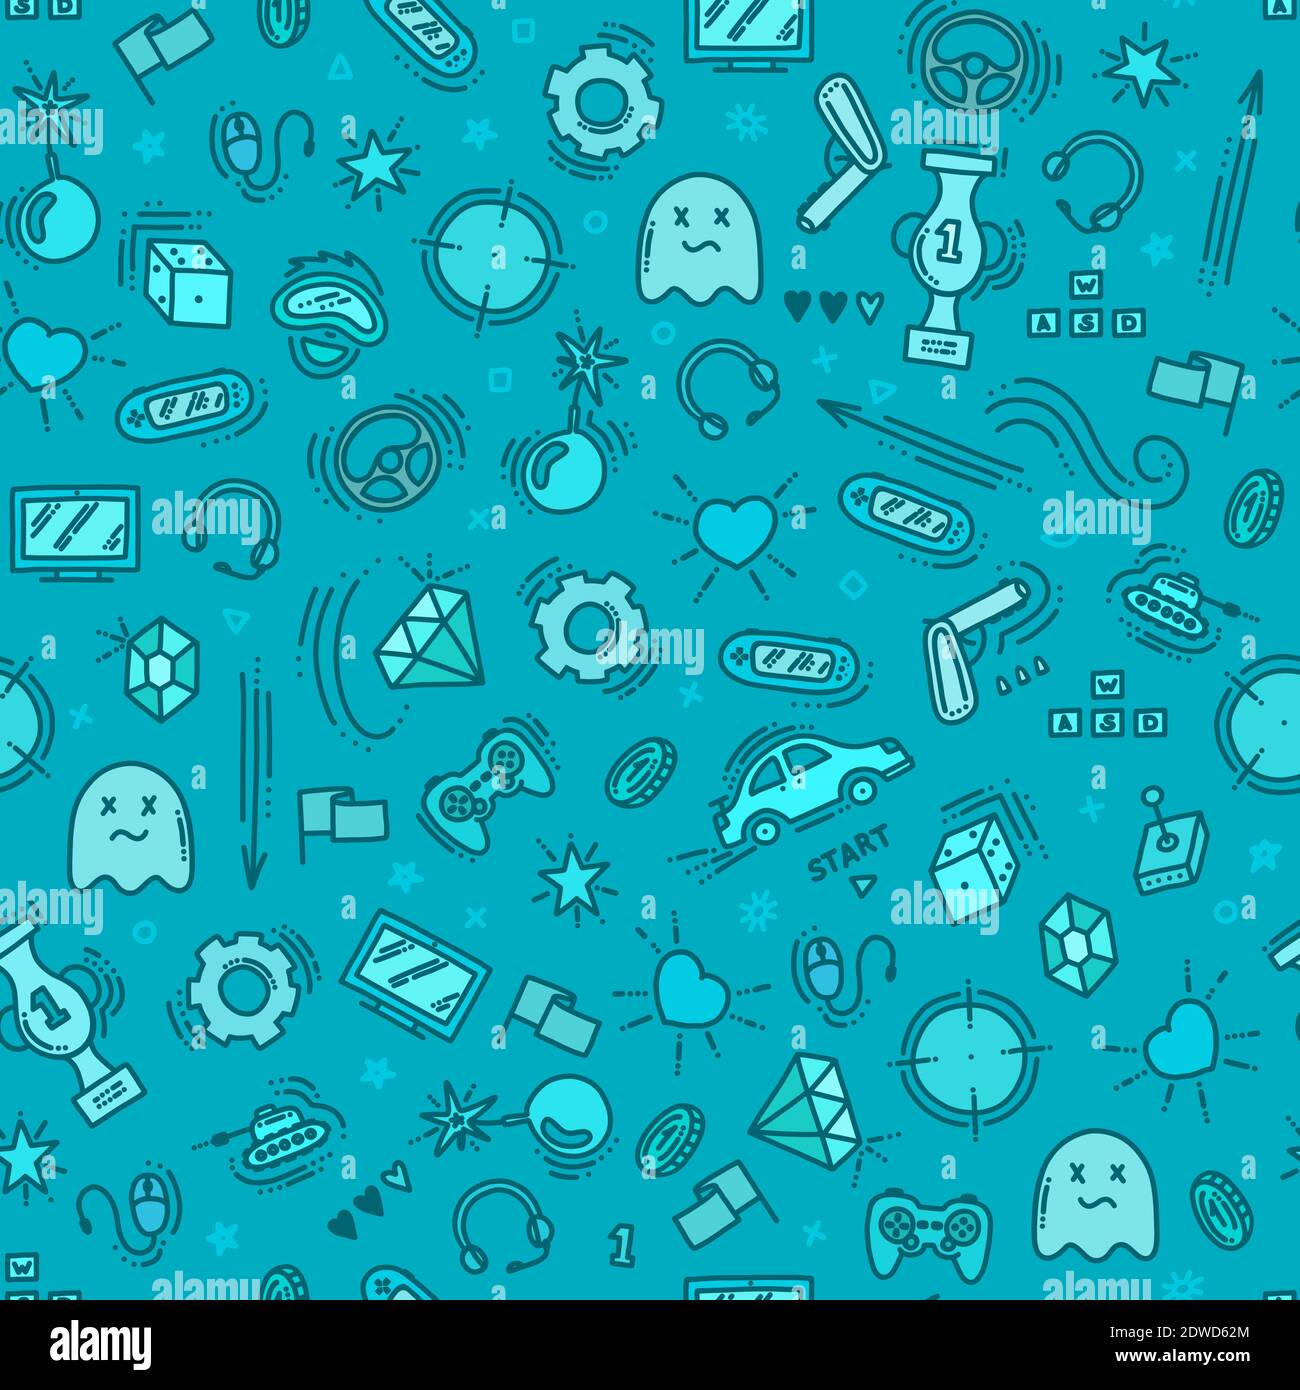 Seamless pattern of gaming objects. Virtual reality, computers, game genres and related stuff. Vector illustration in doodle style. Vector Stock Vector